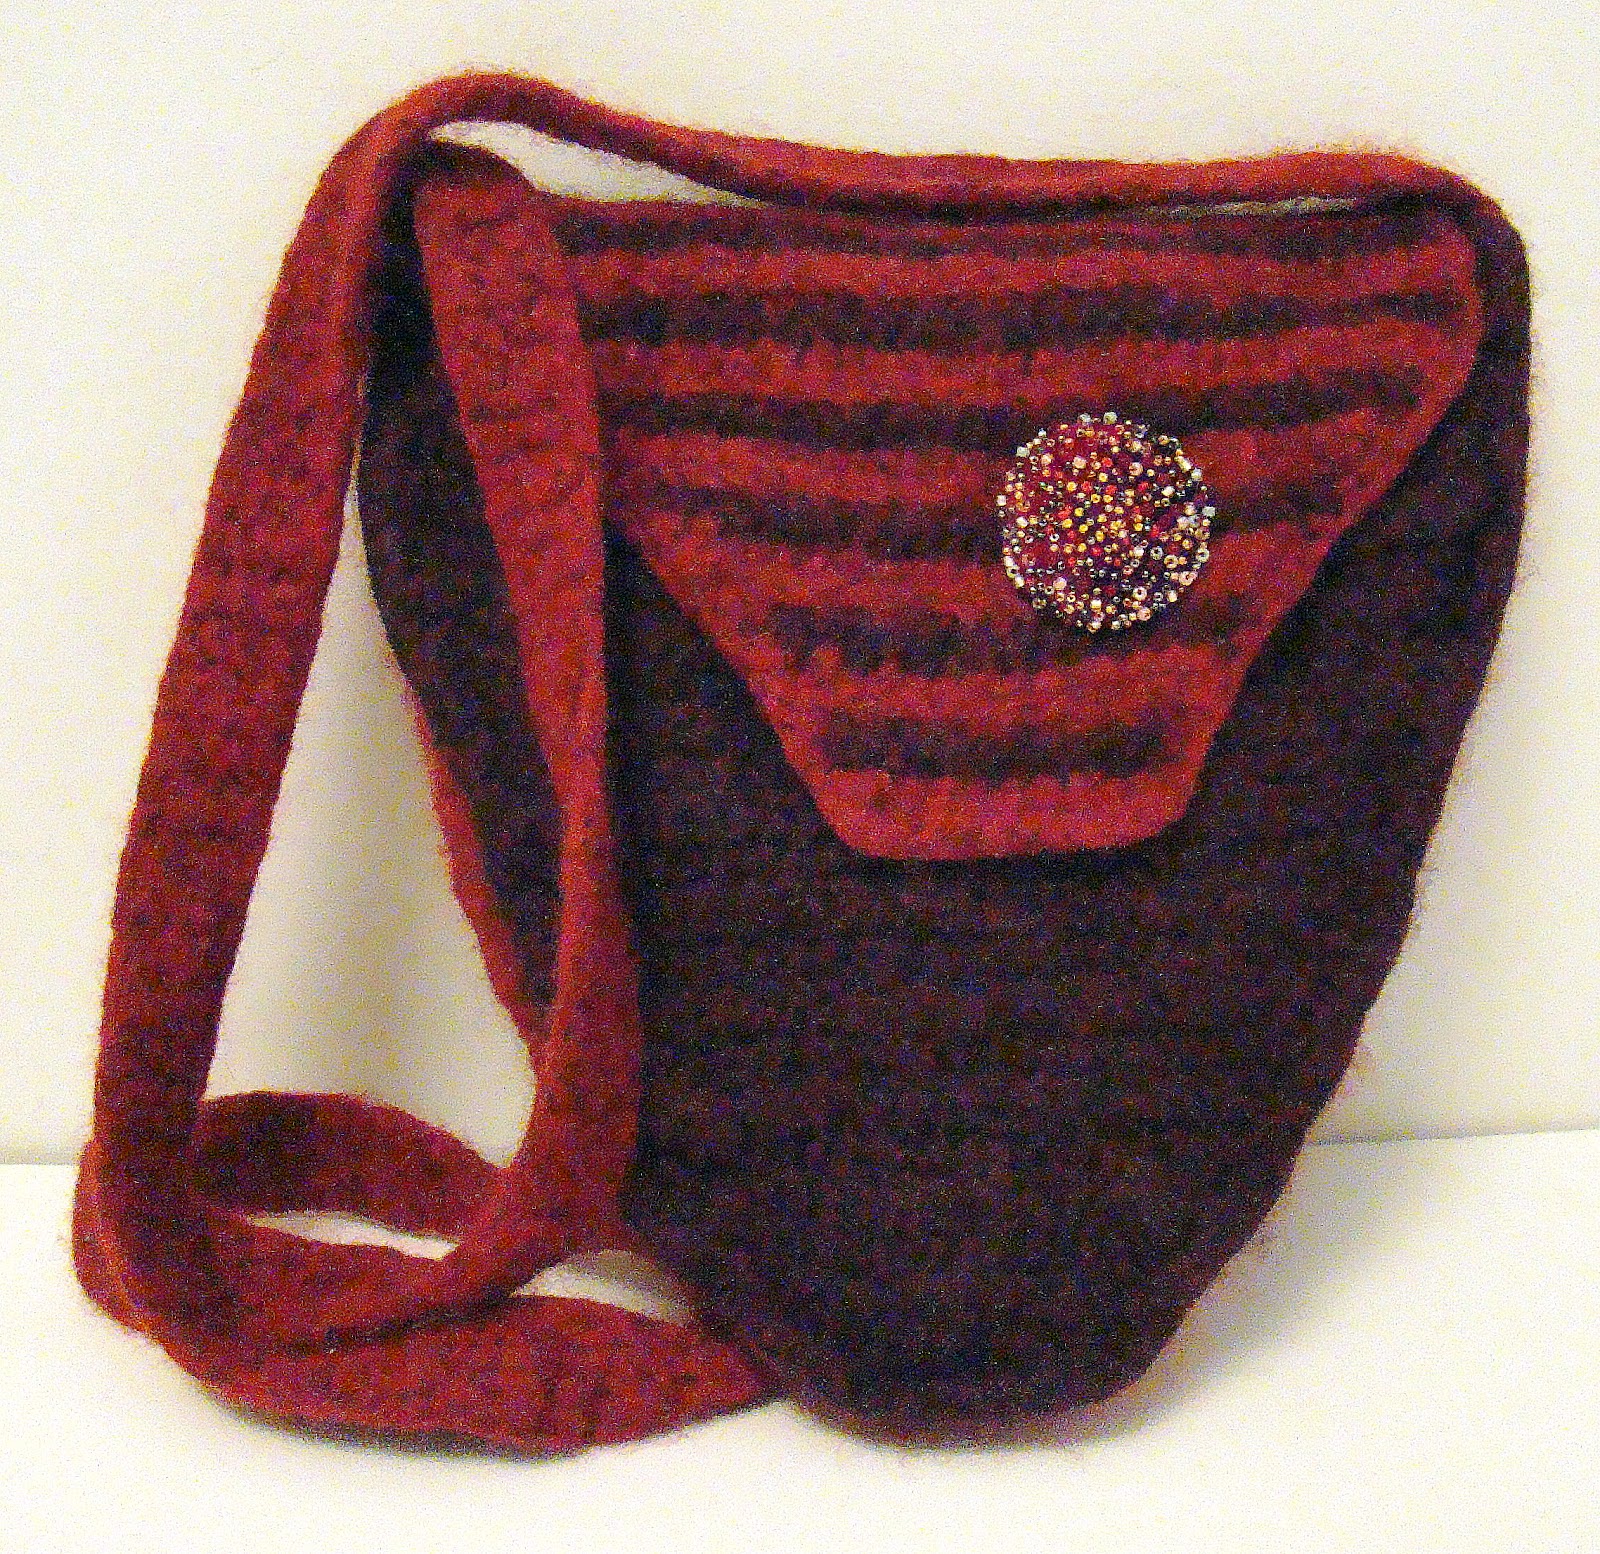 PazzaPazza: FELTING CROCHETED AND KNITTED BAGS